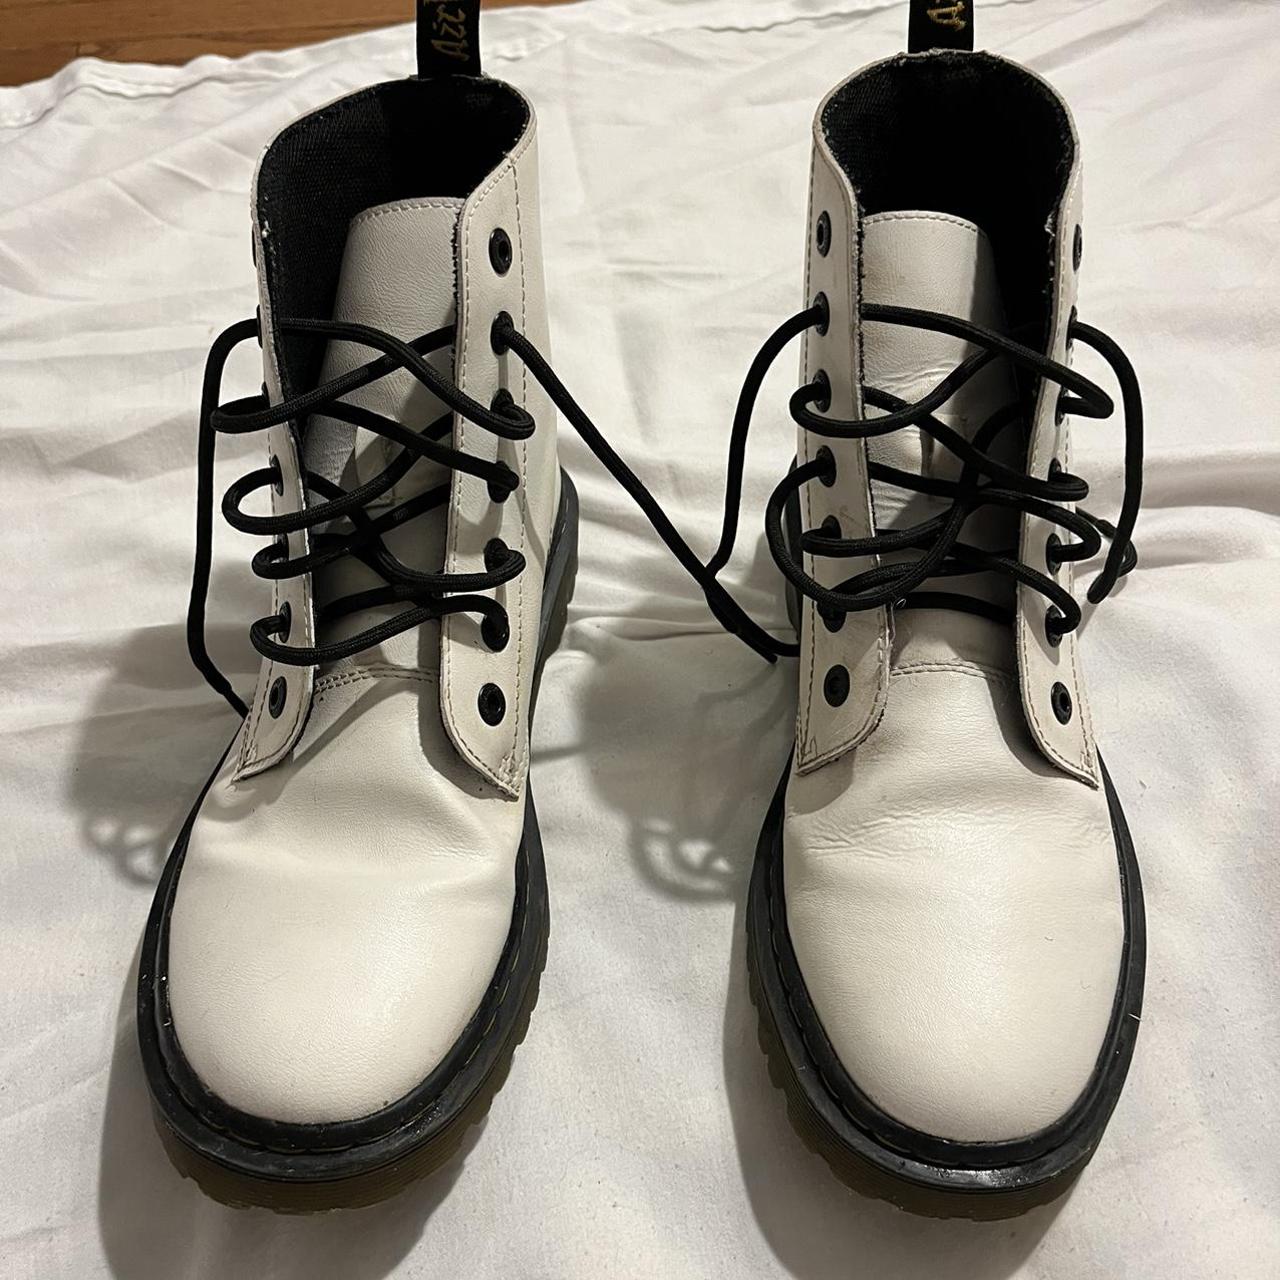 Dr. Martens Women's White and Black Boots (4)